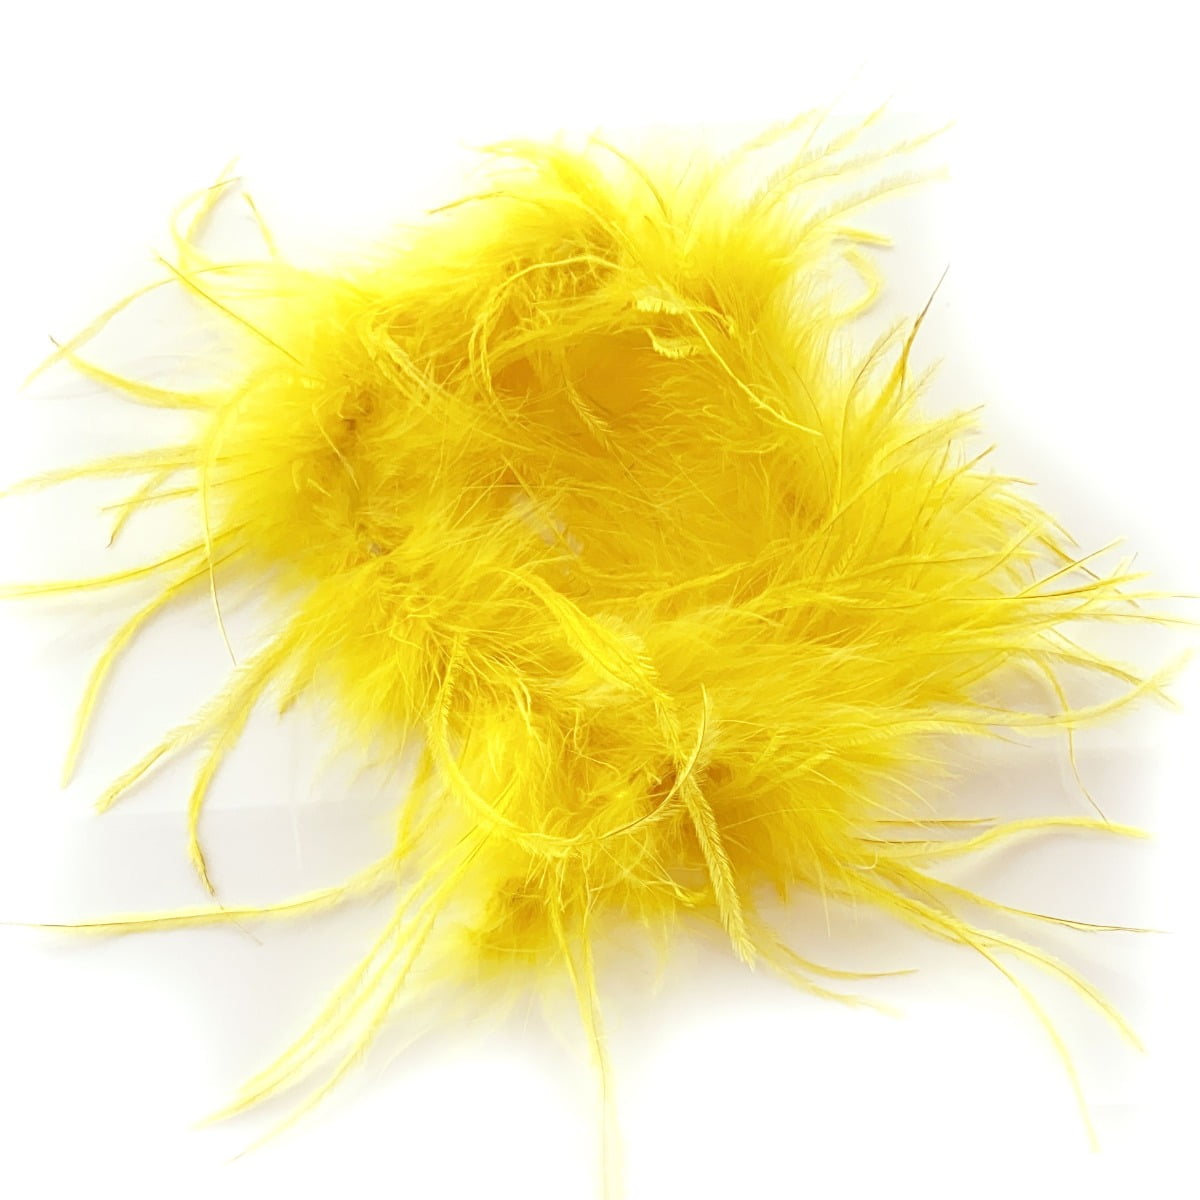 Hairbow Center Ostrich Marabou Feather Boa - 18 inch Length - White, Adult Unisex, Size: One Size